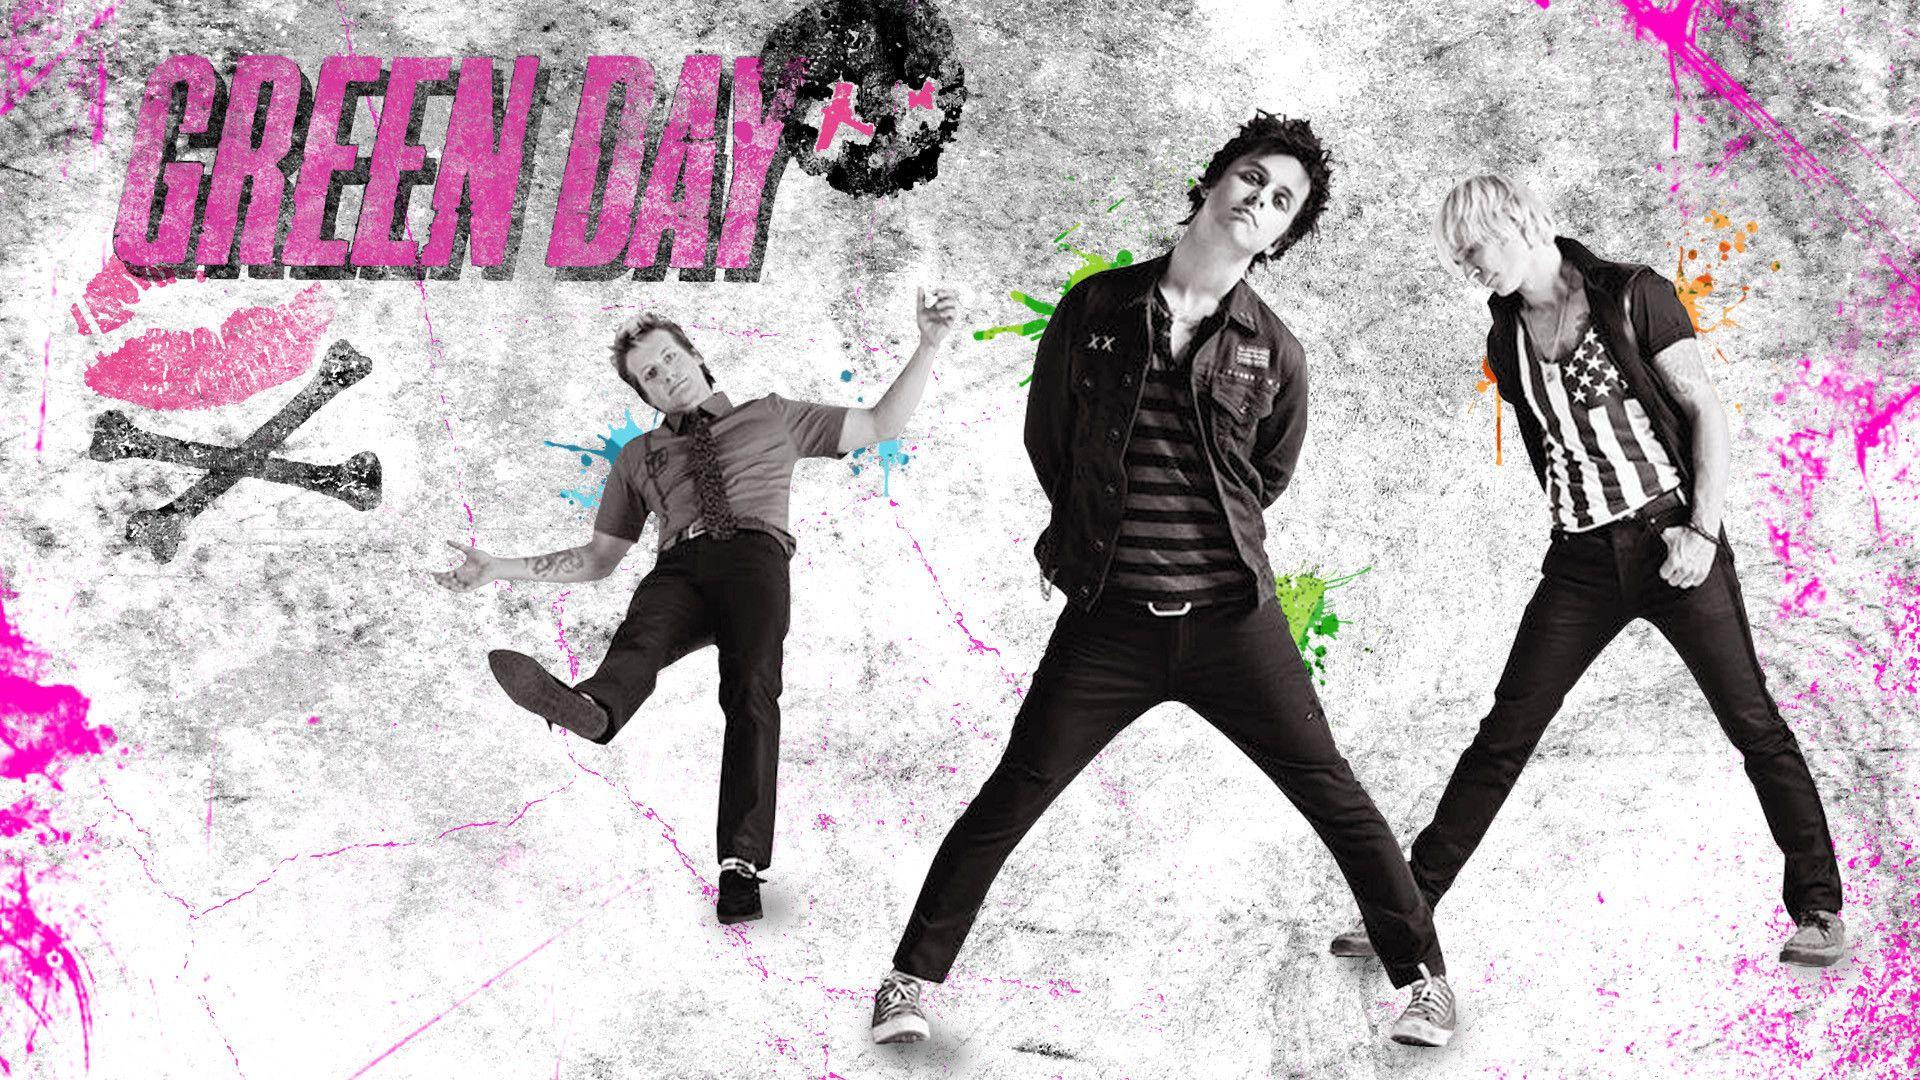 Greenday Wallpaper (78+ images)